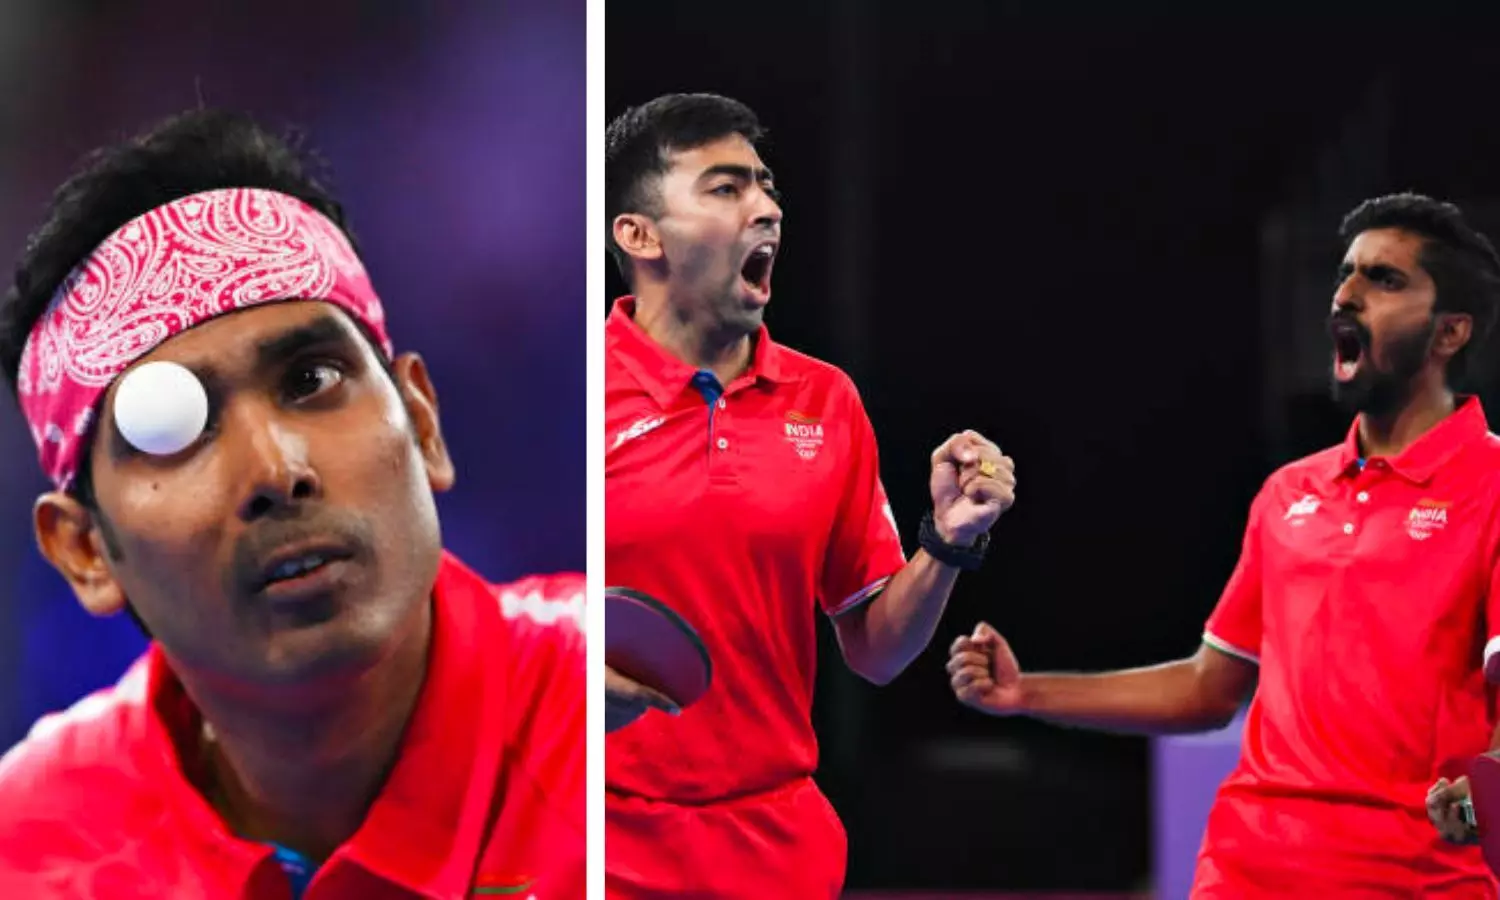 Commonwealth Games 2022 Table Tennis Mens Team Finals LIVE